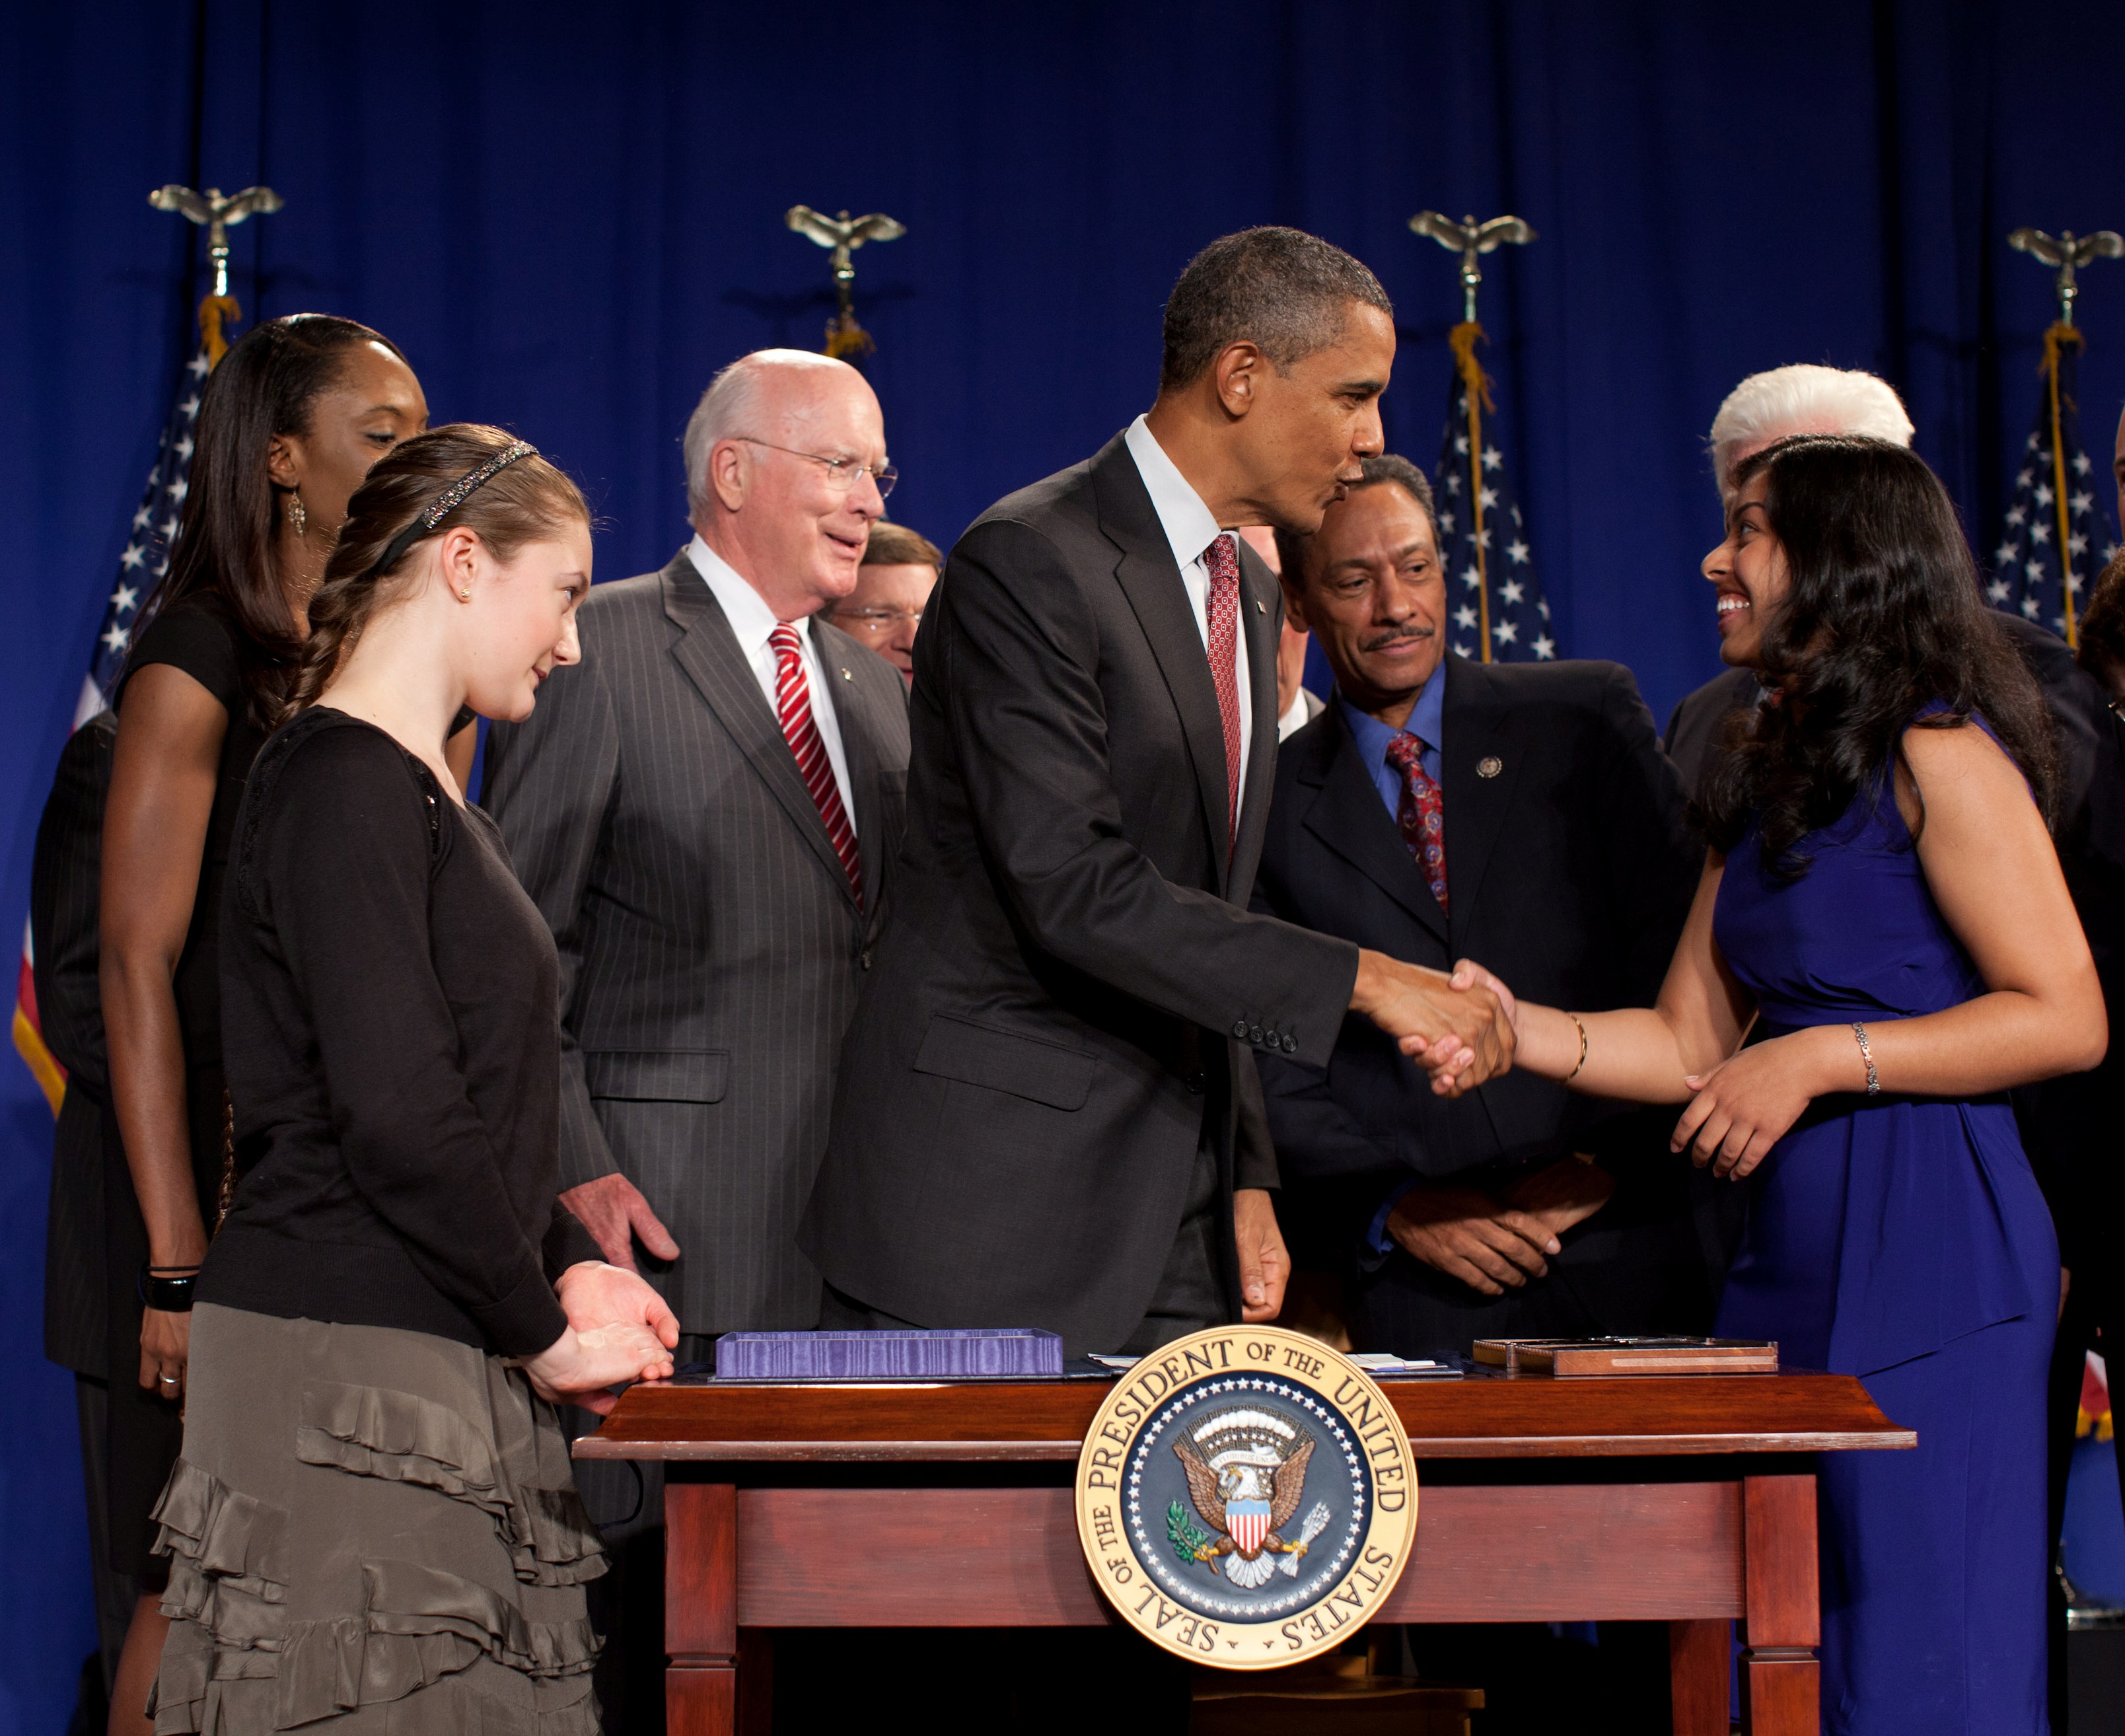 Karishma Popli participated in the America Invents Patent Act signing ceremony for her work to provide solar lamps to underdeveloped communities in India and Africa.